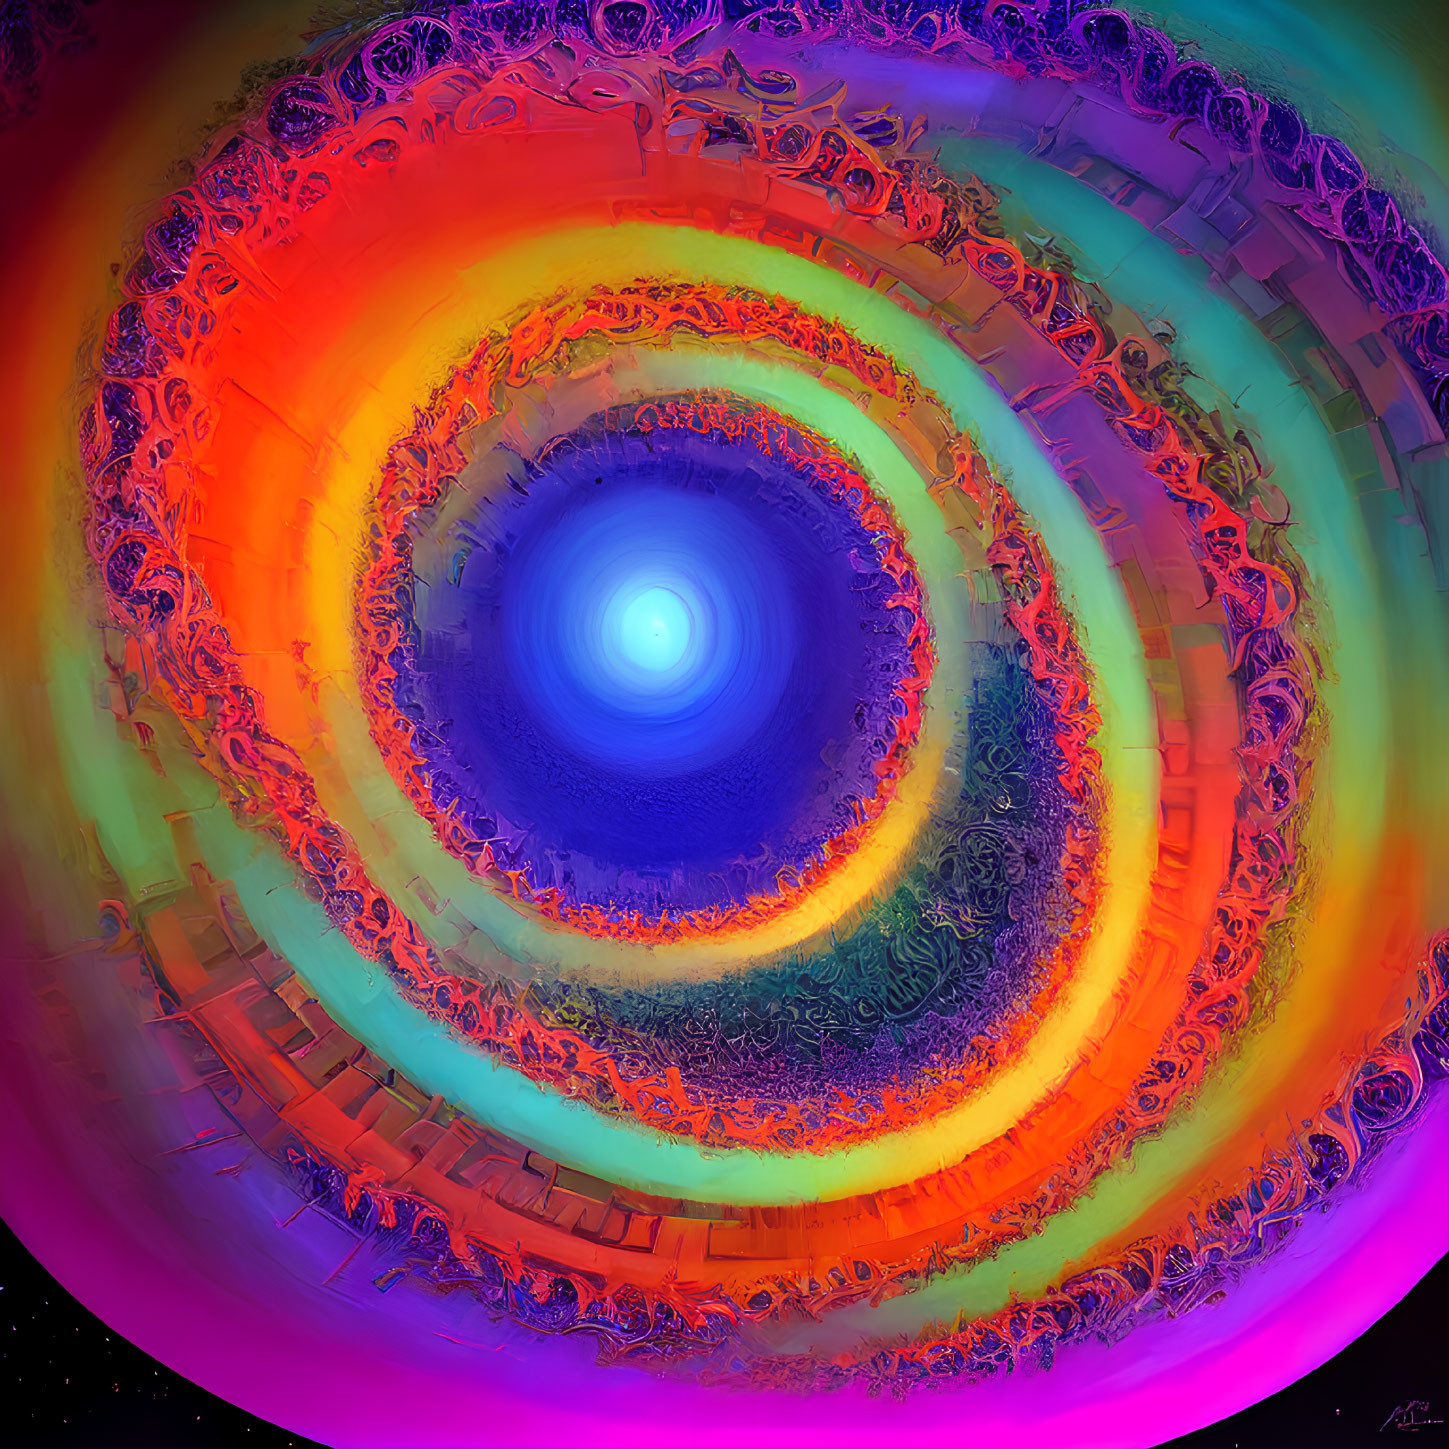 Colorful digital artwork: concentric circles in orange to blue with fractal patterns.